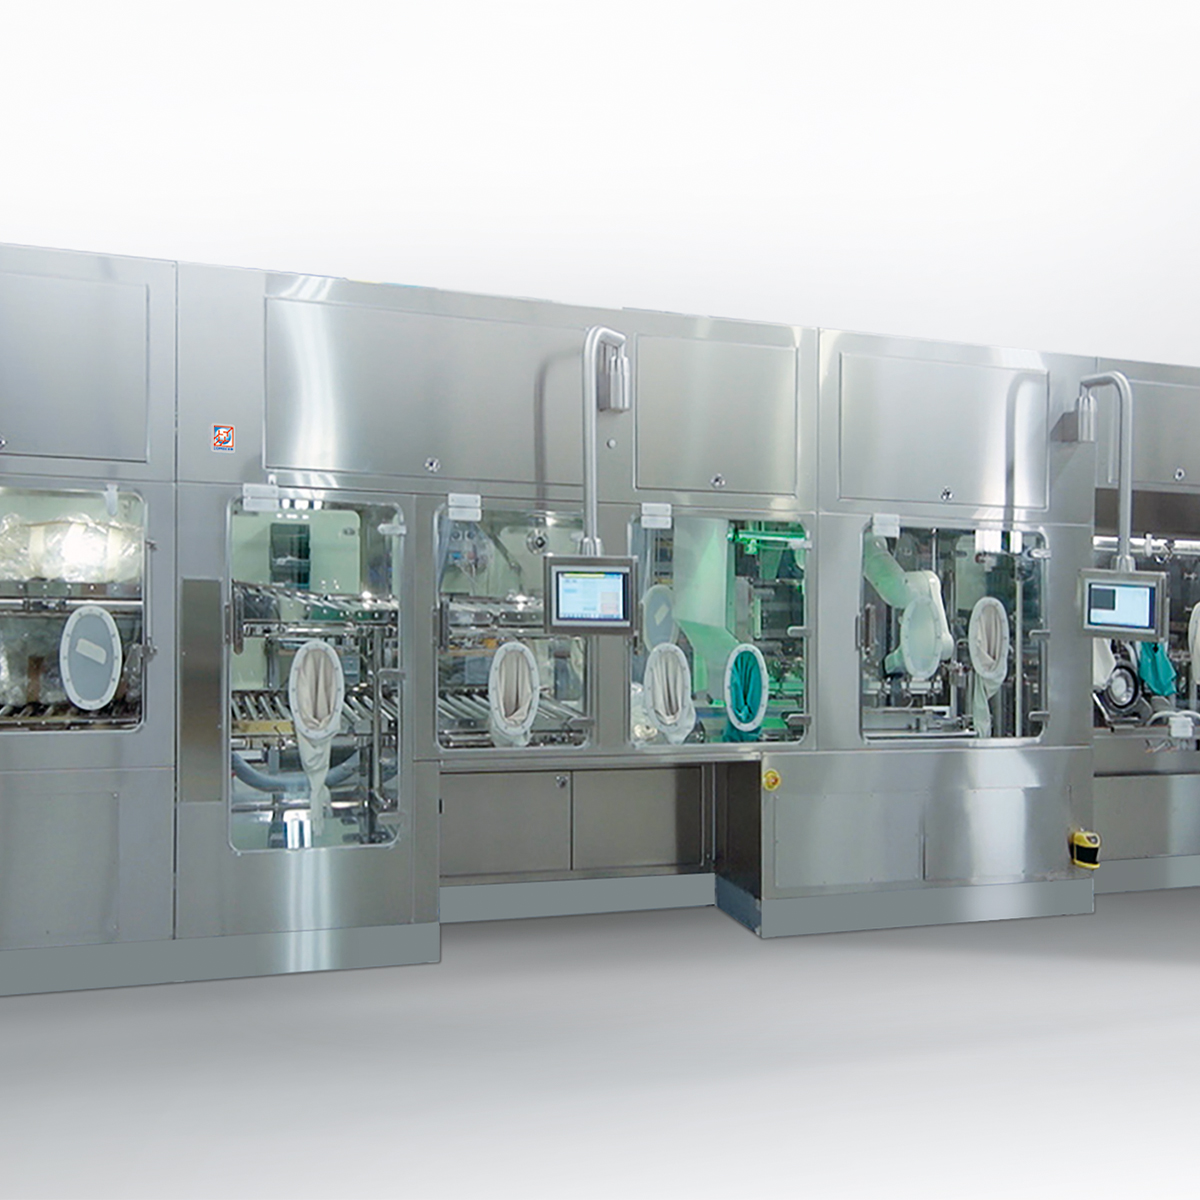 Automatic Aseptic Filling Line for IV bags